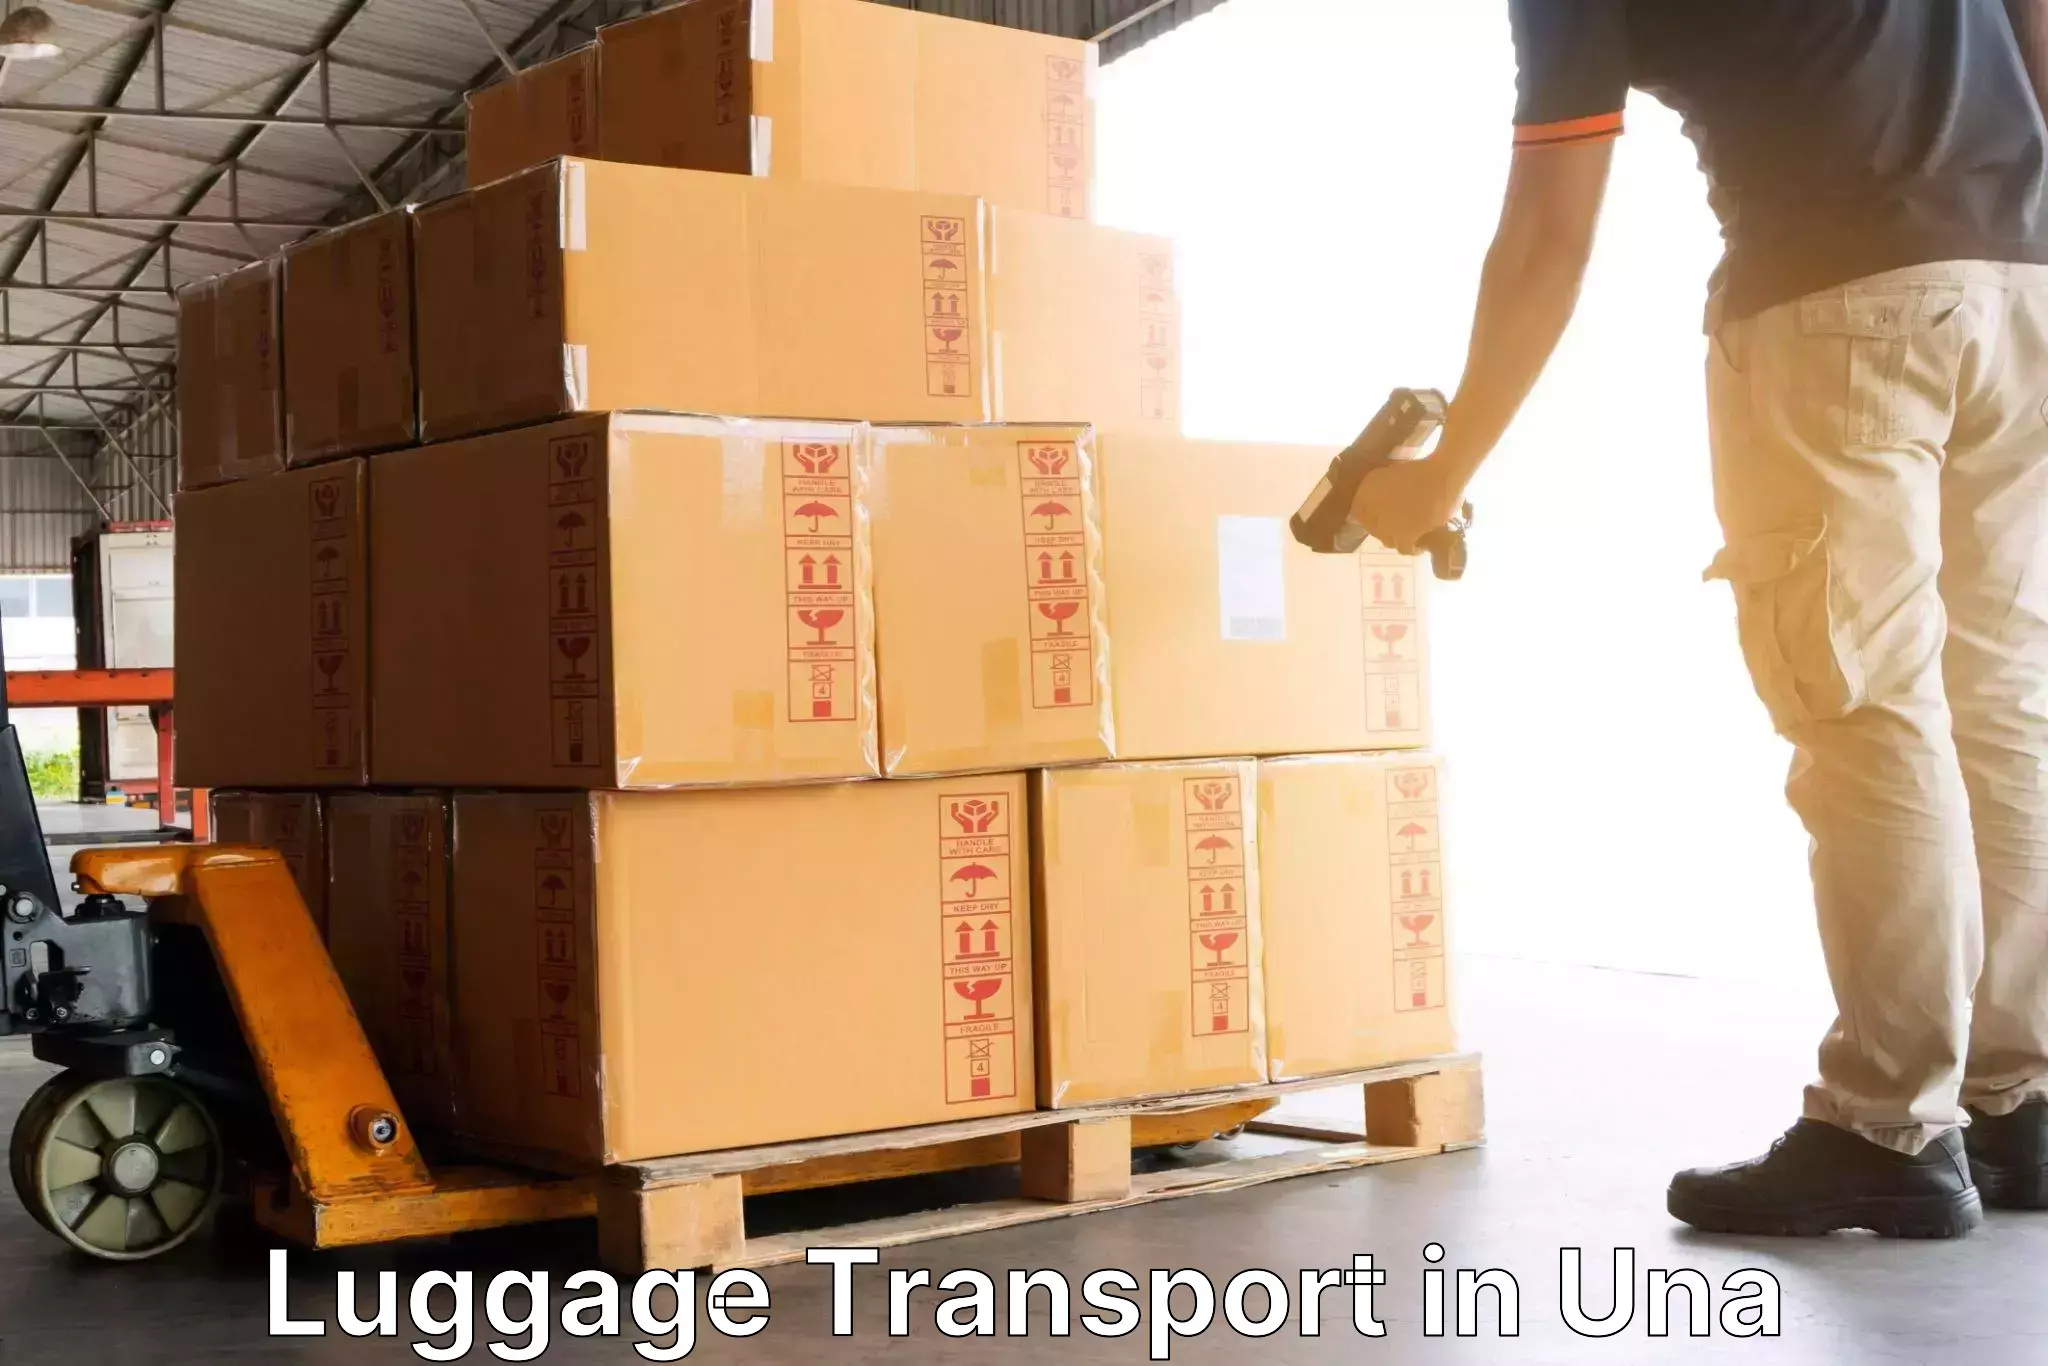 Baggage delivery technology in Una